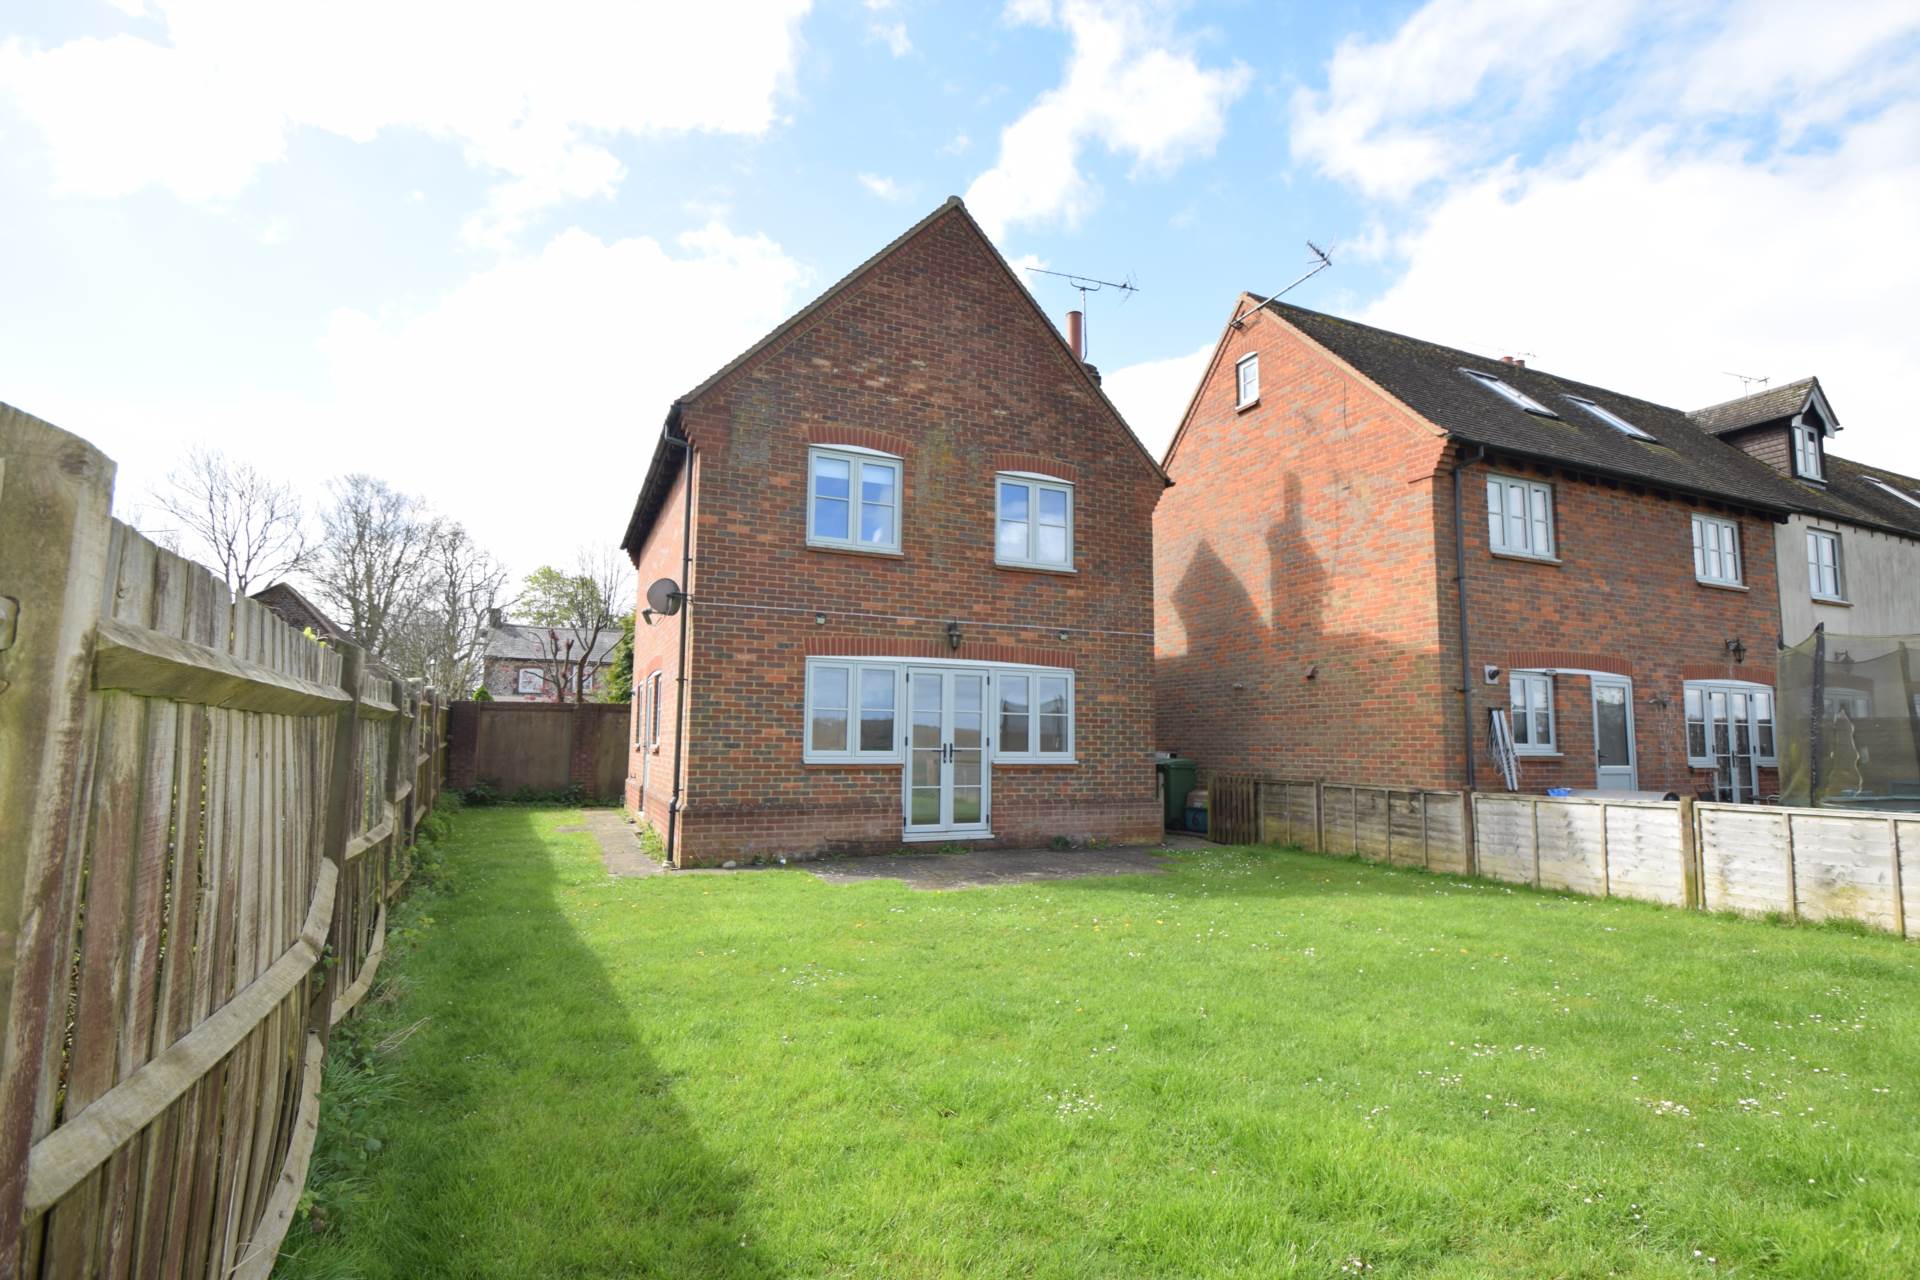 3 bed Detached House for rent in High Wycombe. From Griffith & Partners - Watlington